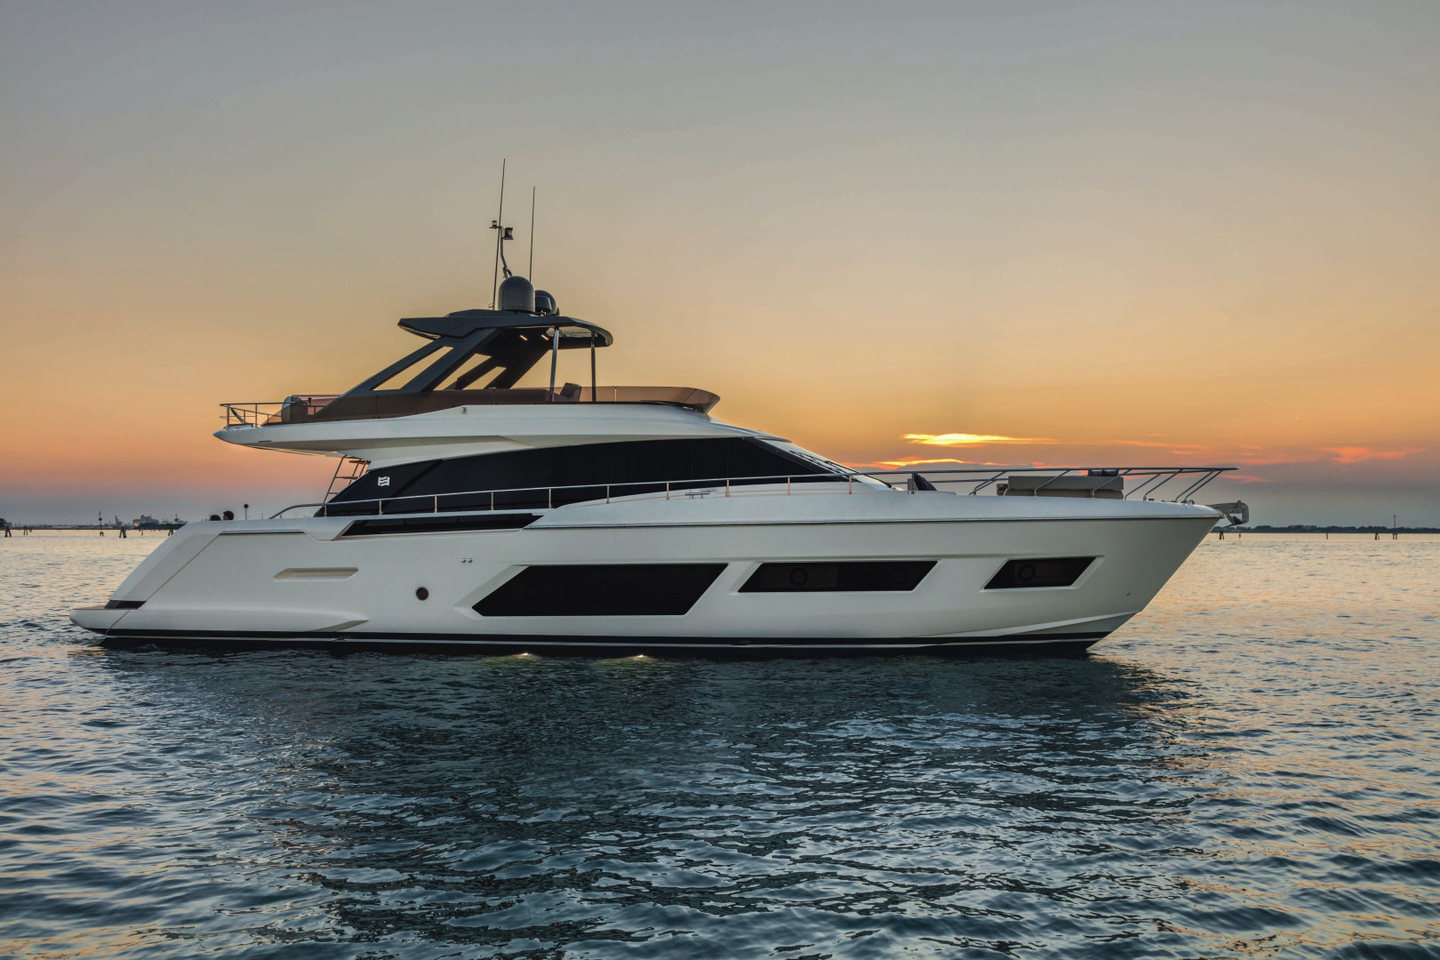 360 VR Virtual Tours of the Ferretti Yachts 670